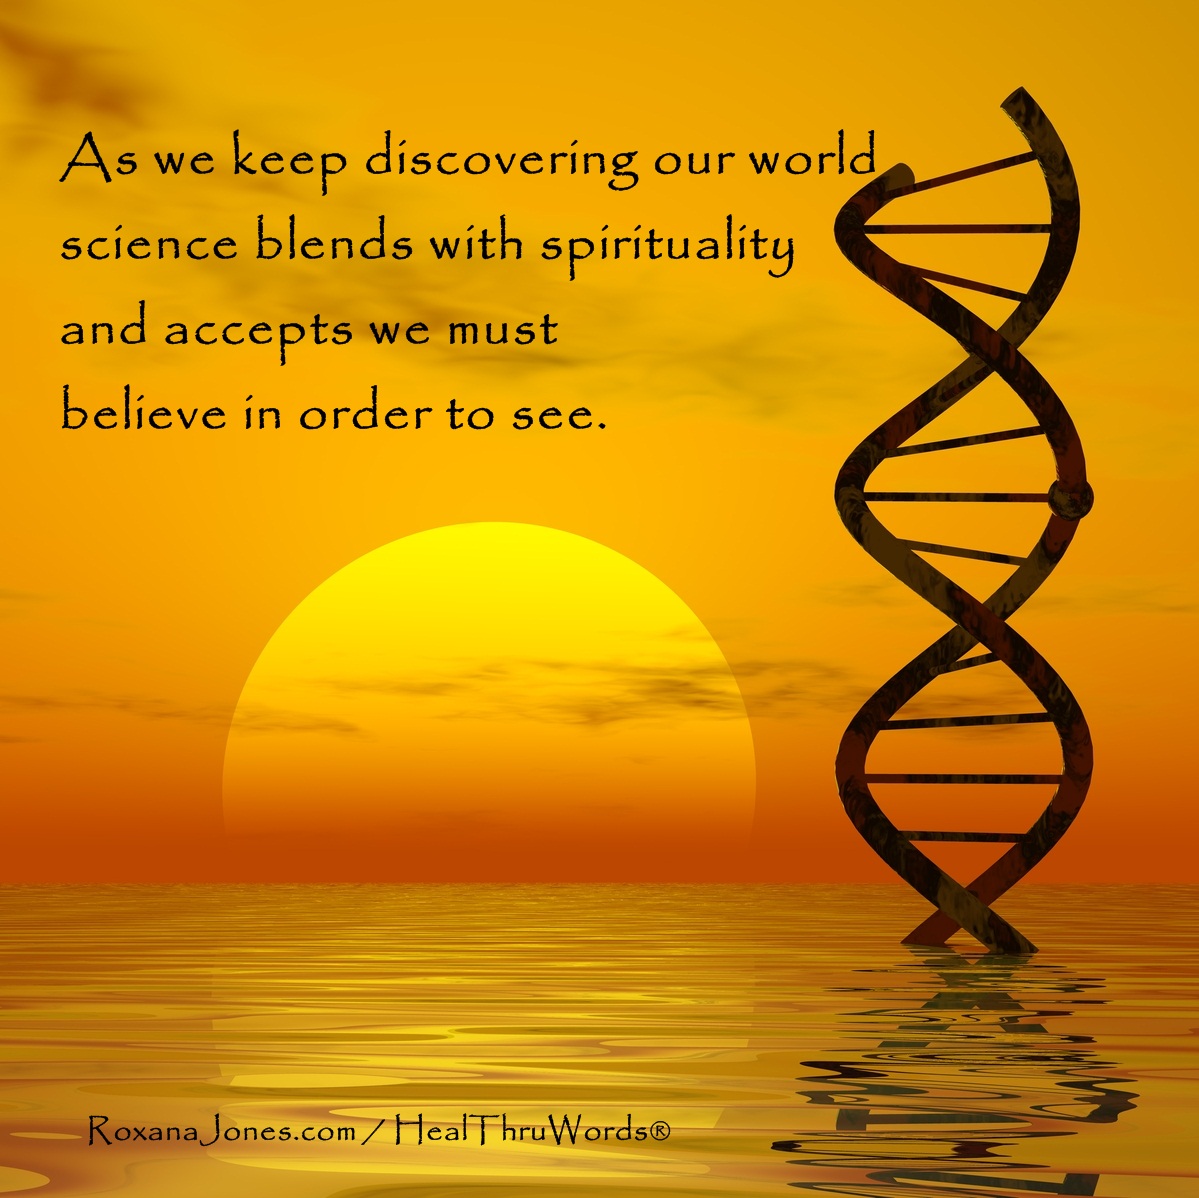 as we keep discovering our world science blends with spirituality and accepts we must believe in order to see.